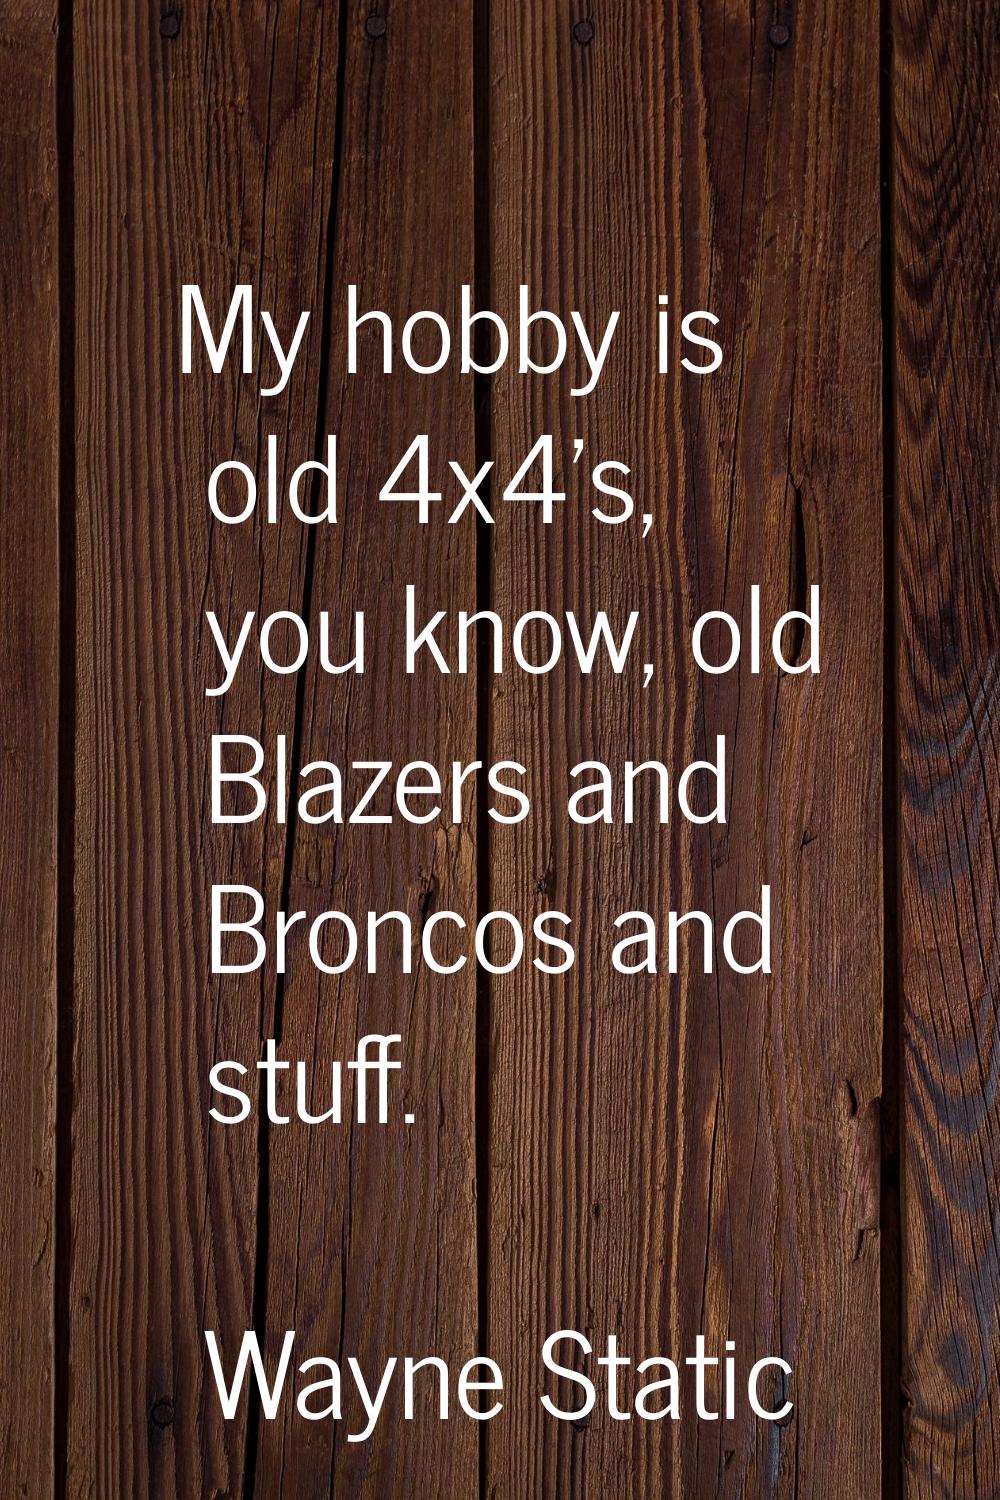 My hobby is old 4x4's, you know, old Blazers and Broncos and stuff.